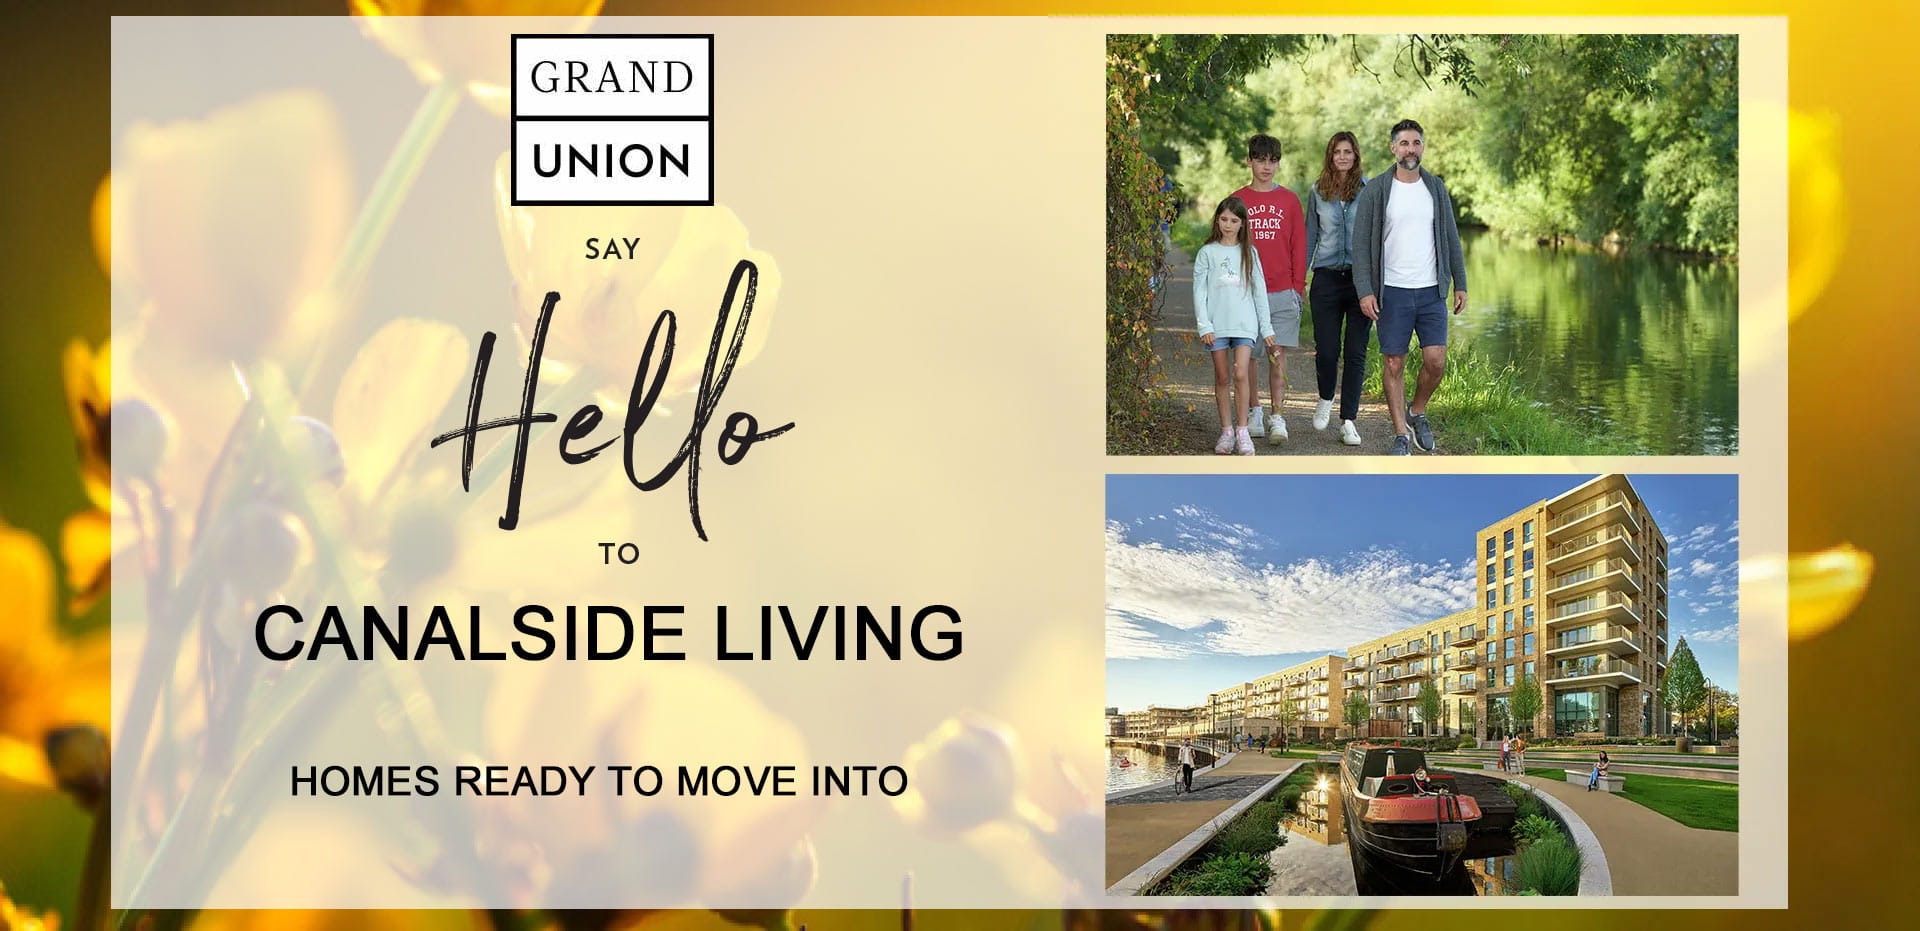 Grand Union, Say Hello to Canalside Living